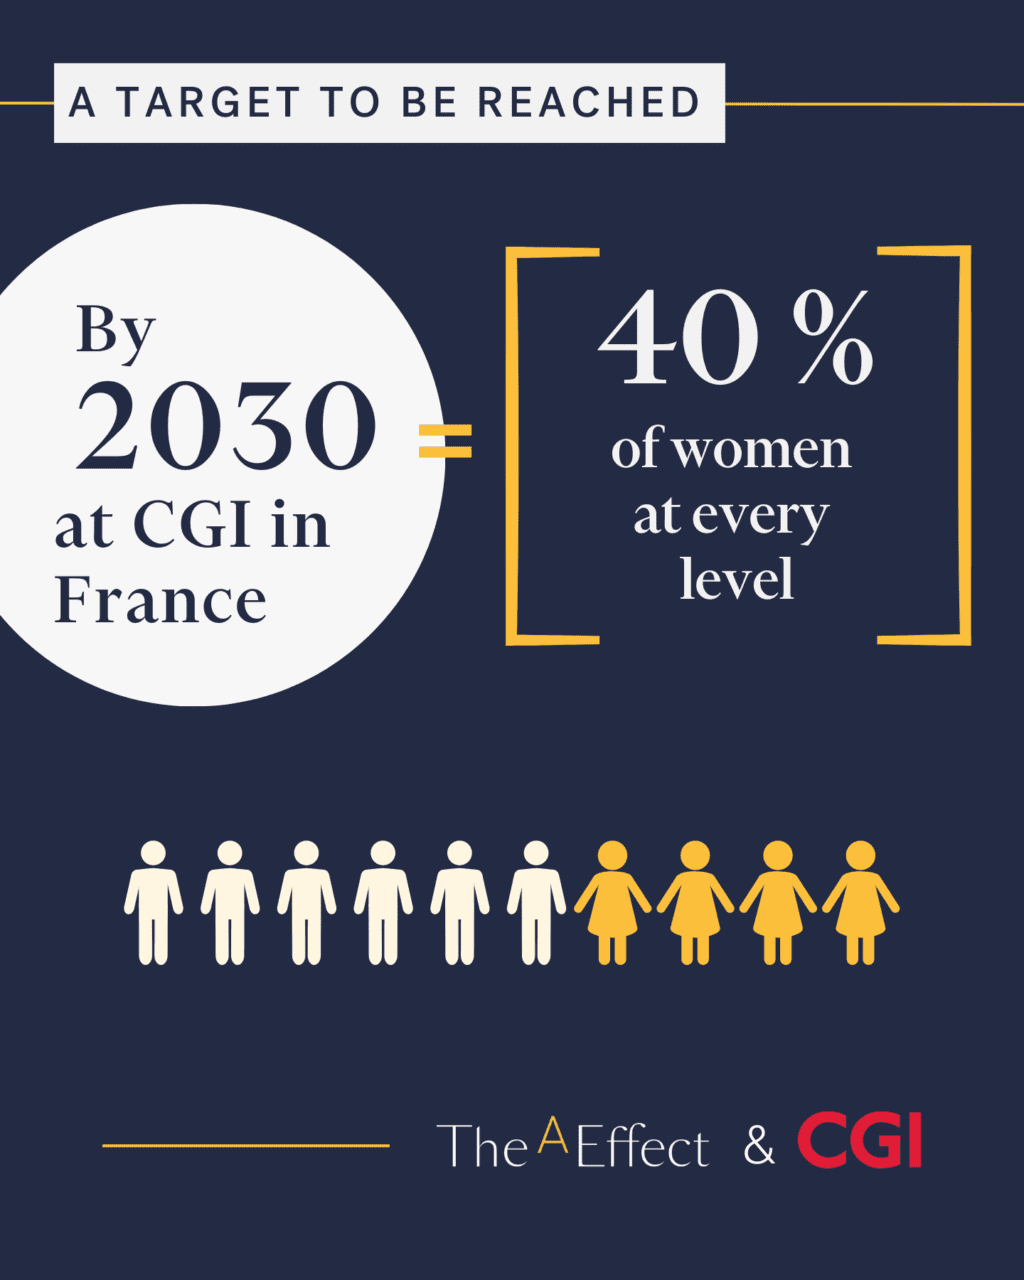 40 % of women at every level by 2030